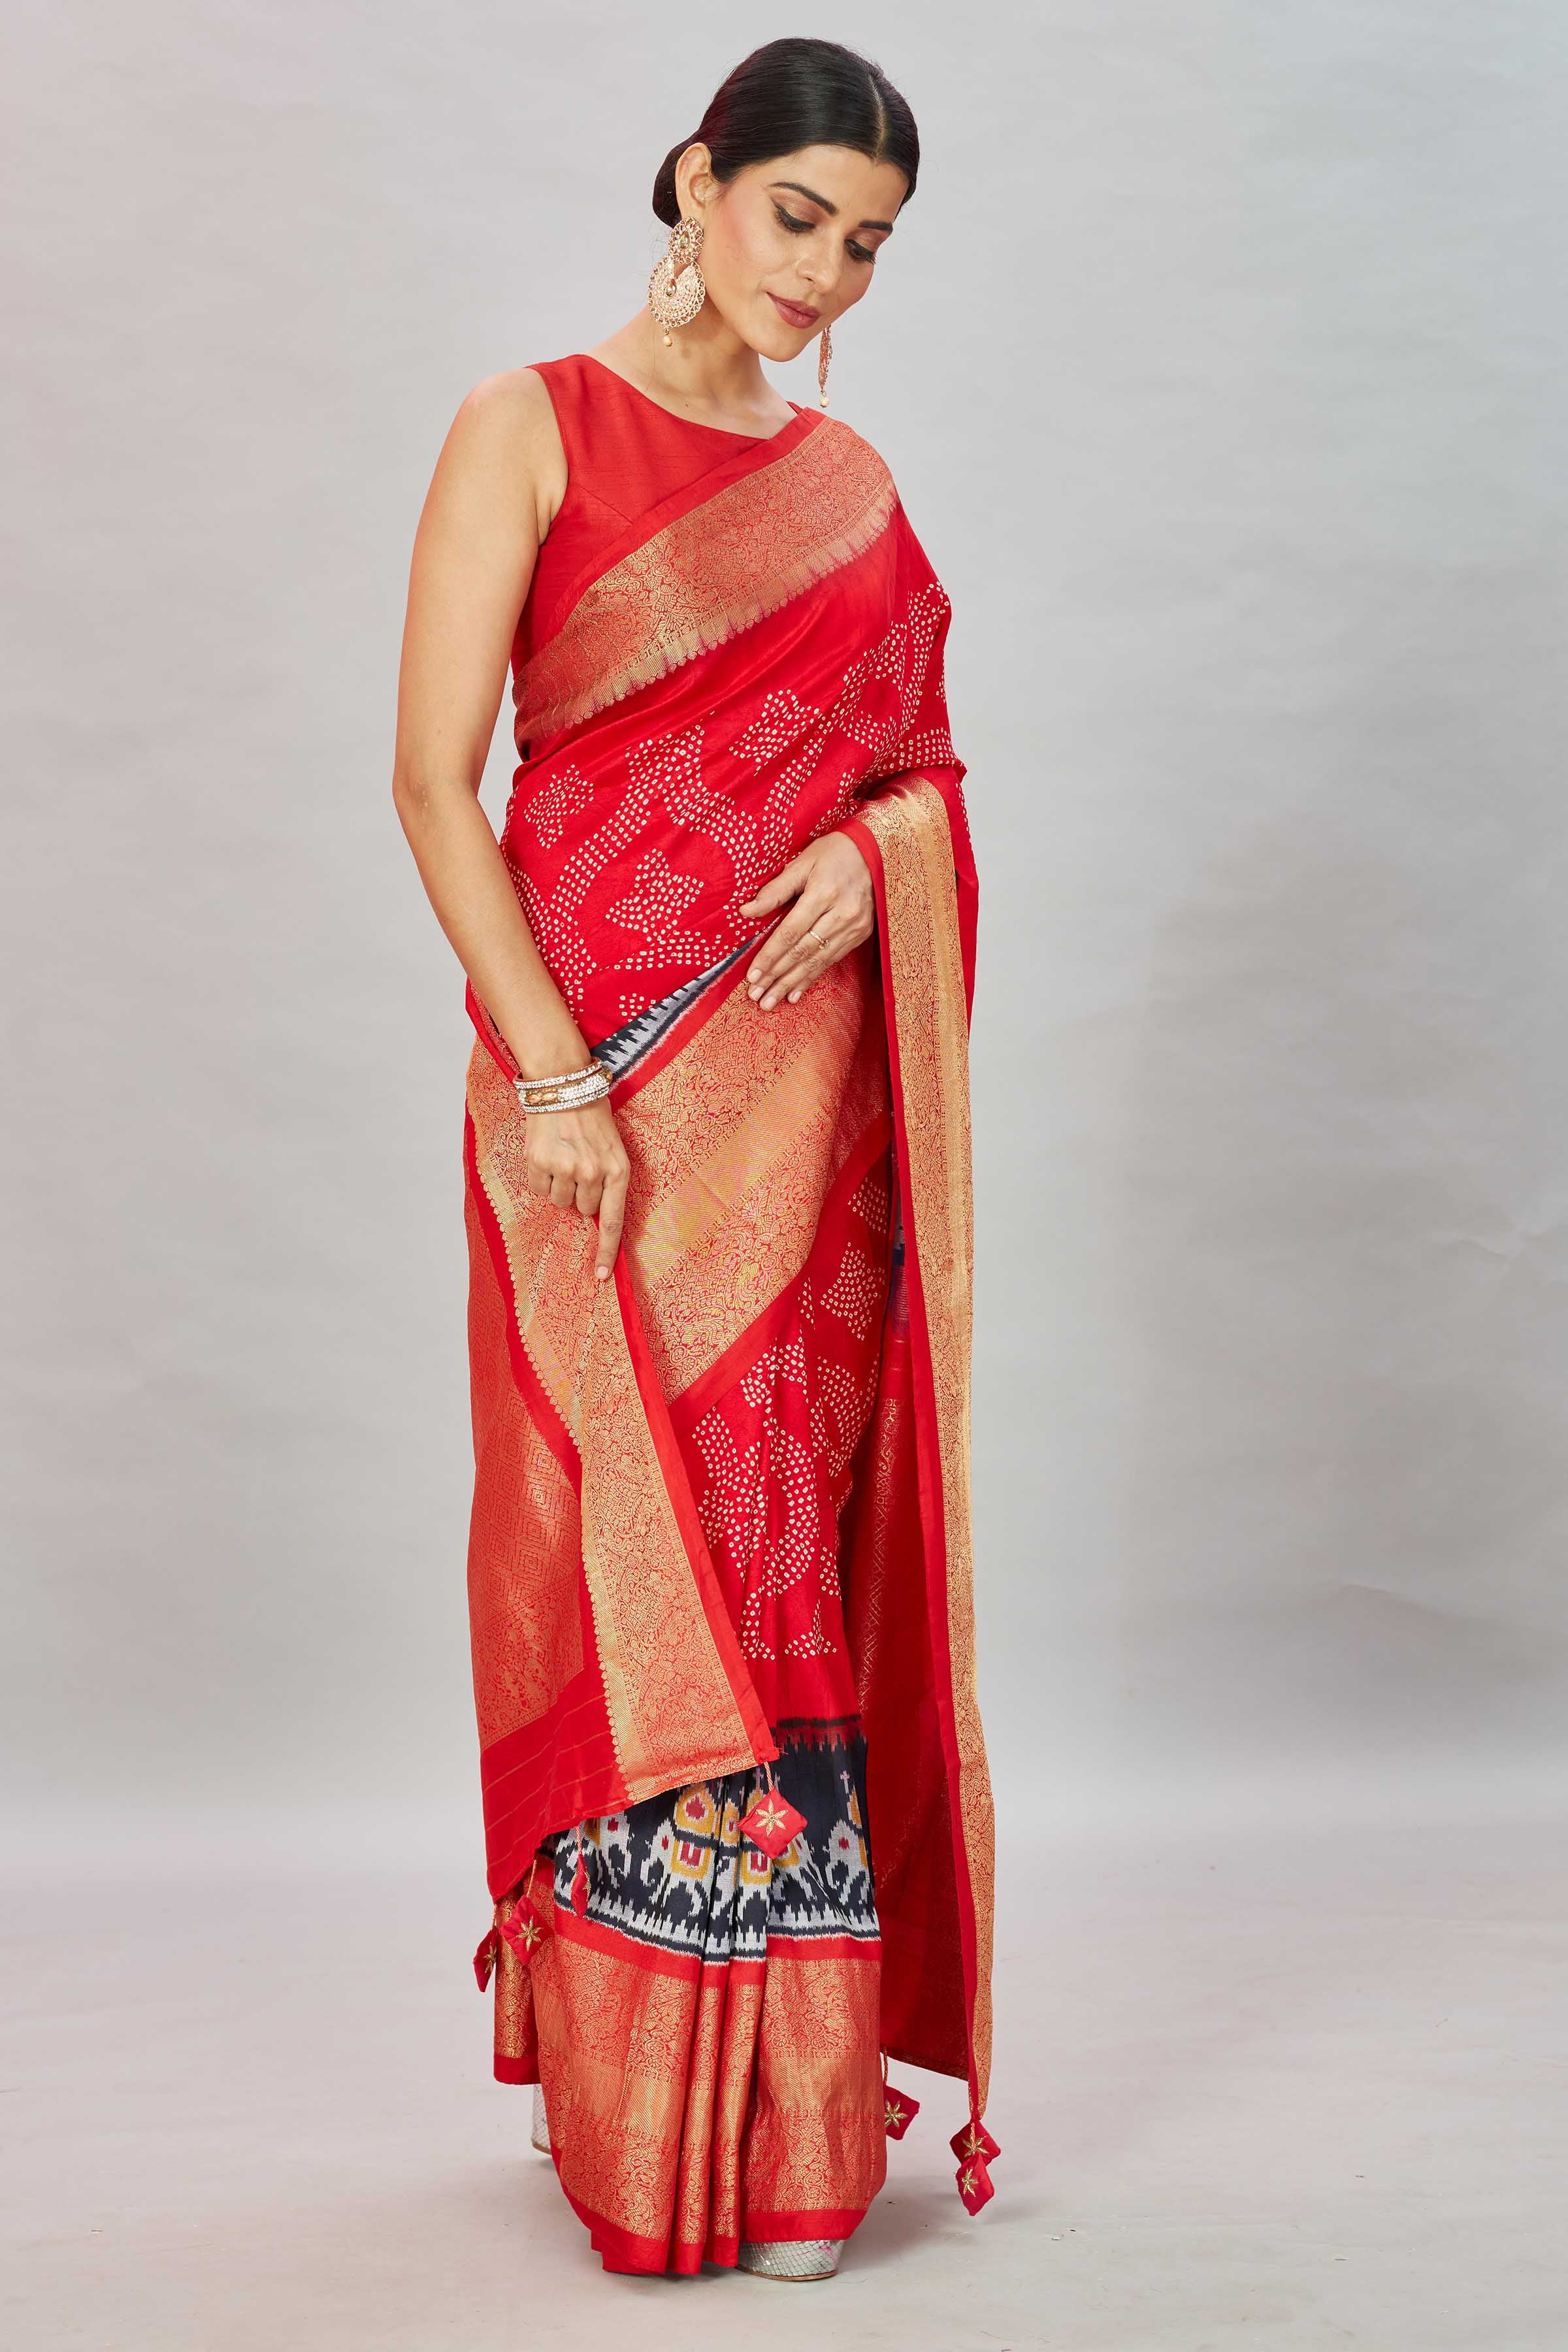 Buy red bandhej Kanjivaram silk saree online in USA with ikkat border. Look your best on festive occasions in latest designer sarees, pure silk sarees, Kanjivaram silk saris, handwoven saris, tussar silk sarees, embroidered saris from Pure Elegance Indian clothing store in USA.-side